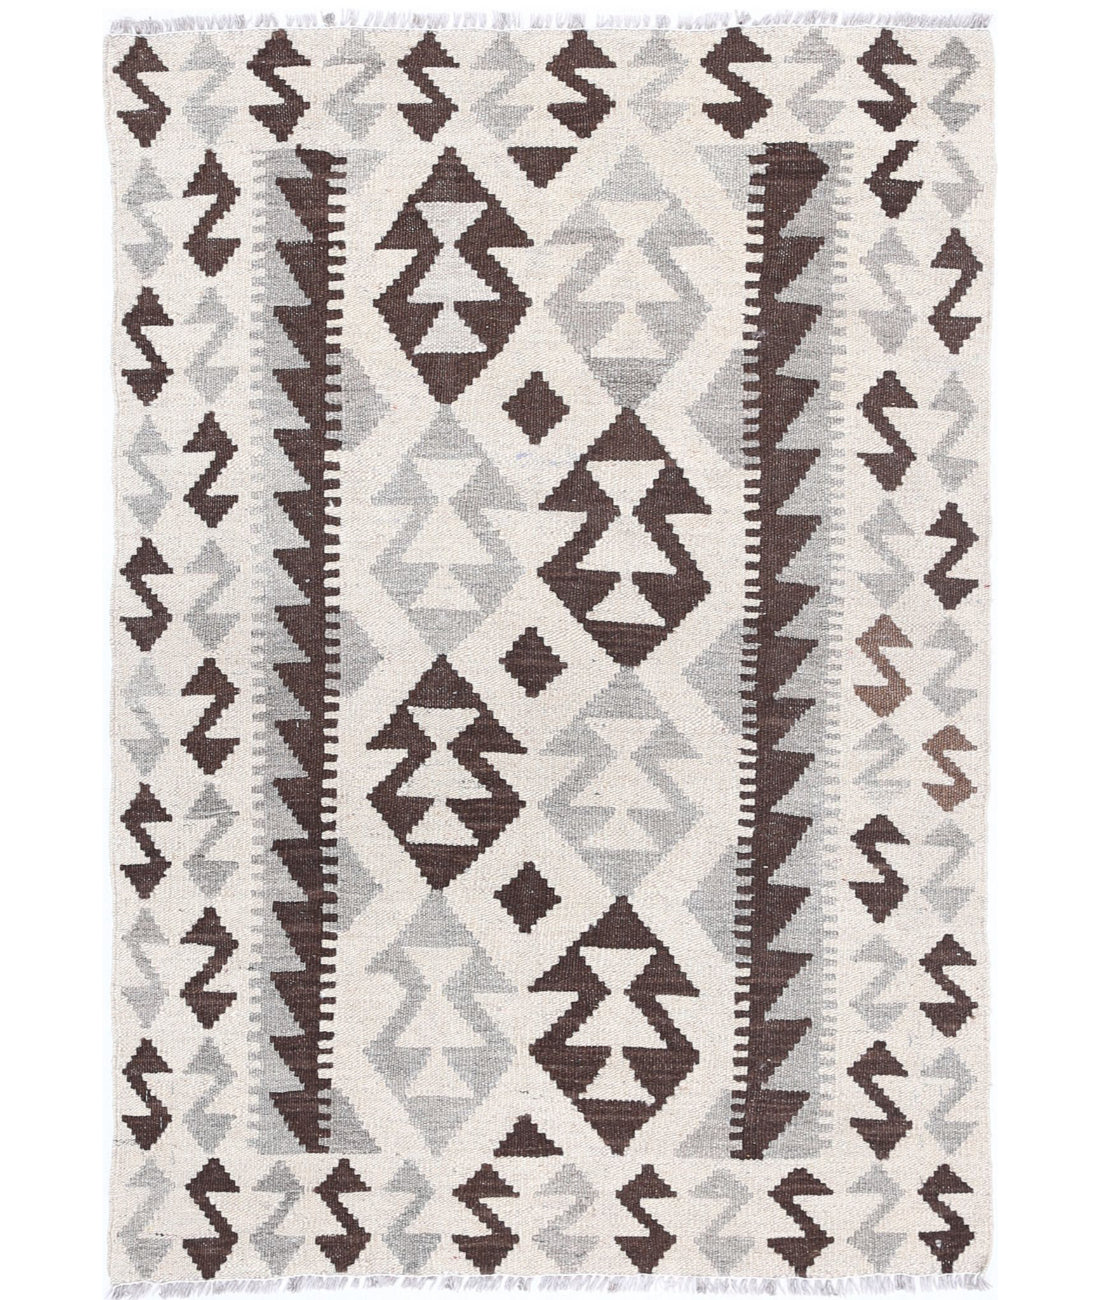 Hand Knotted Natural Kilim Wool Kilim Rug - 2&#39;9&#39;&#39; x 3&#39;10&#39;&#39; 2&#39;9&#39;&#39; x 3&#39;10&#39;&#39; (83 X 115) / Ivory / Taupe